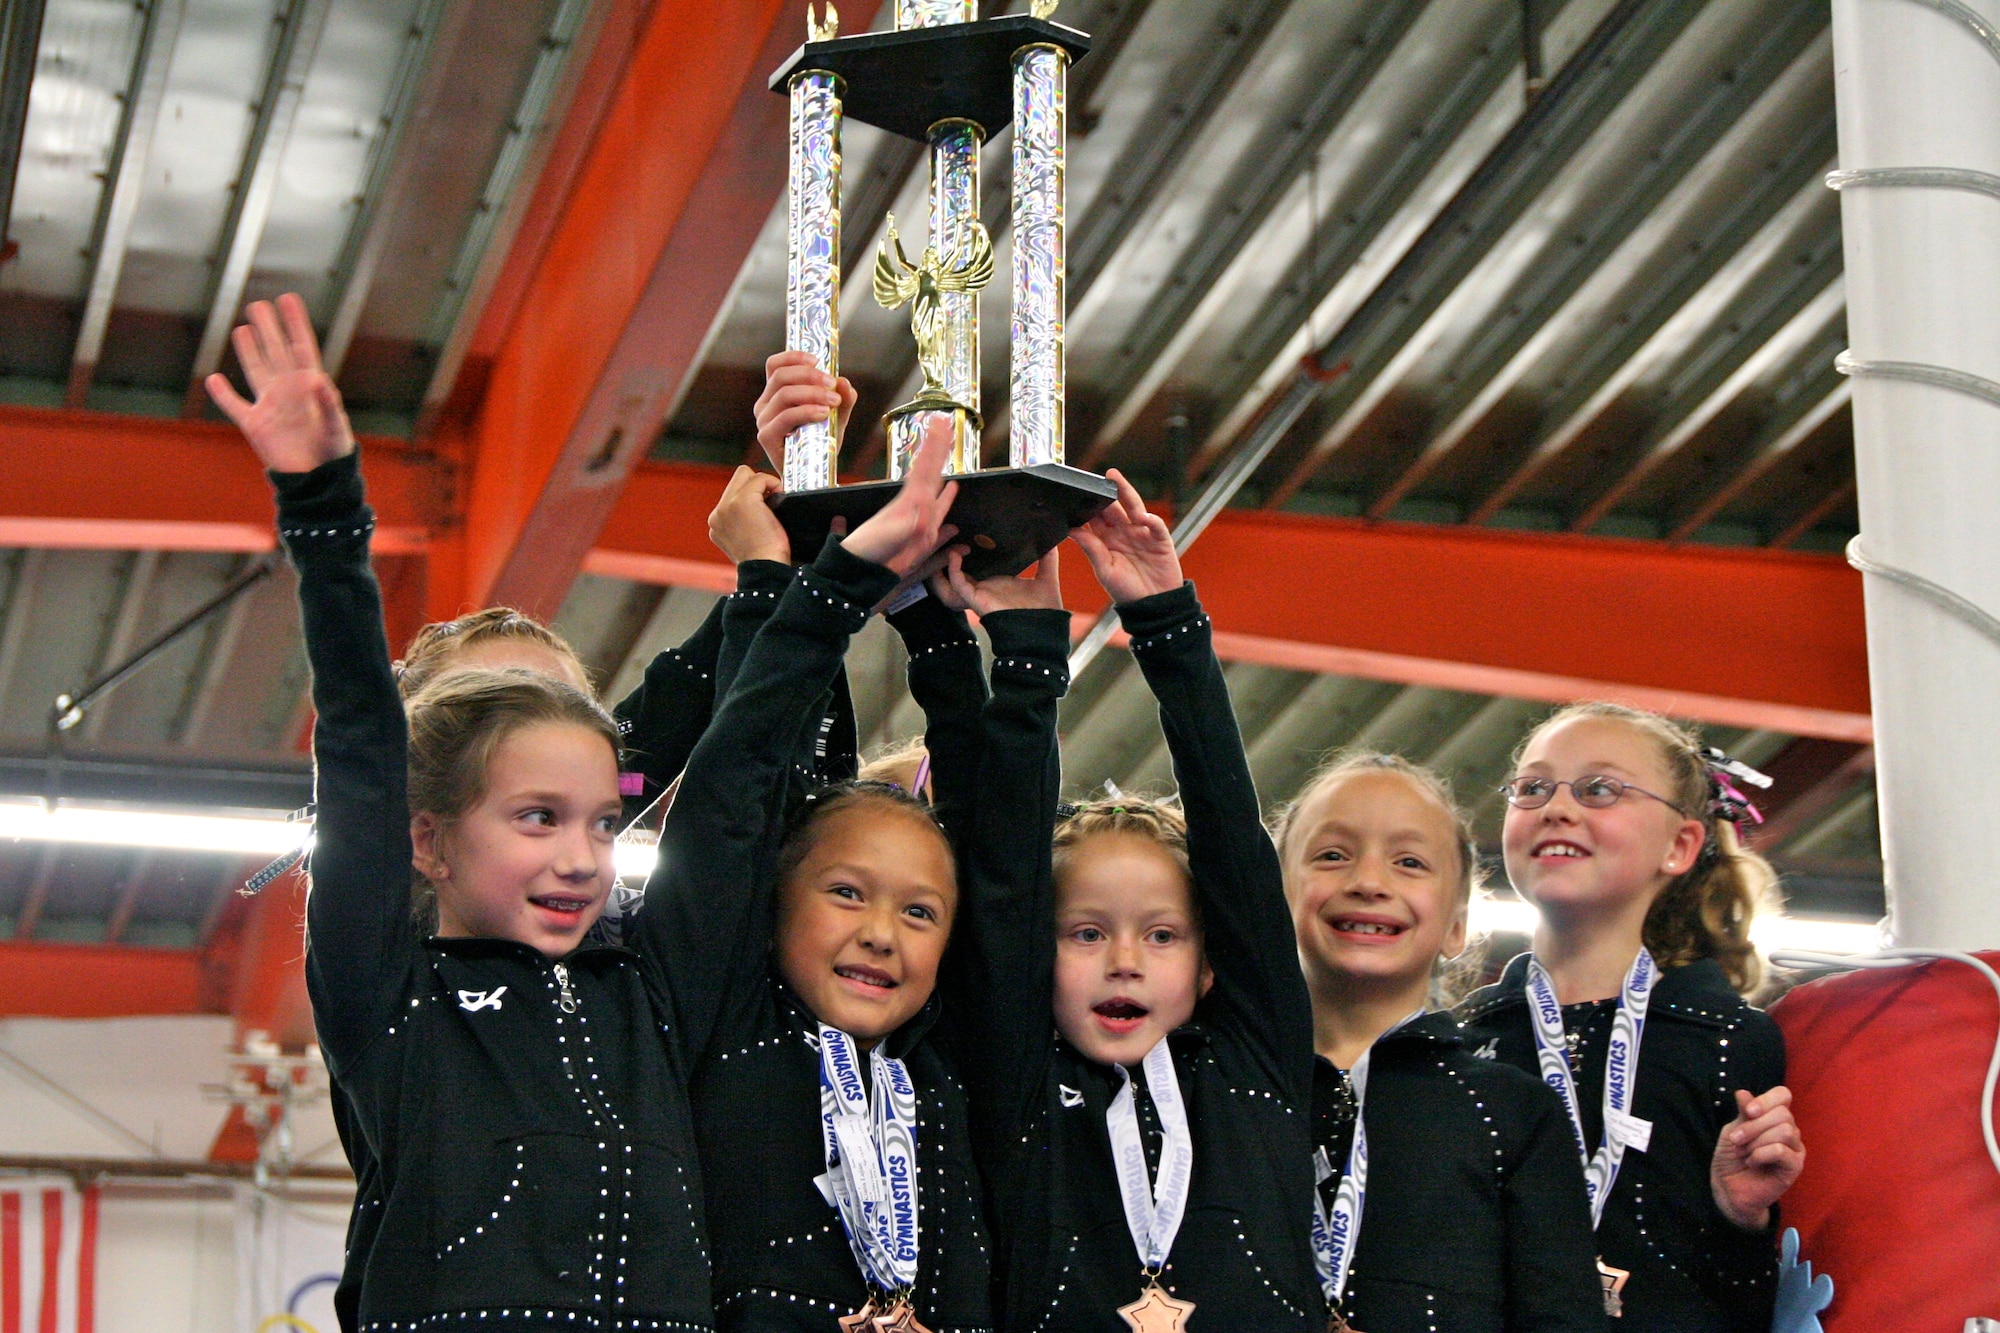 CAMARILLO, Calif. -- The Vandenberg Youth Programs Jets girls gymnastics Level 4 team receives their First Place Team trophy at the Snowflake Classic gymnastics competition Feb. 6 here. The Jets, coached by Allison Pledger under the direction of Lee Pledger, range in age from 6 - 10 years old. (Photo by Cheryl Castellenos)